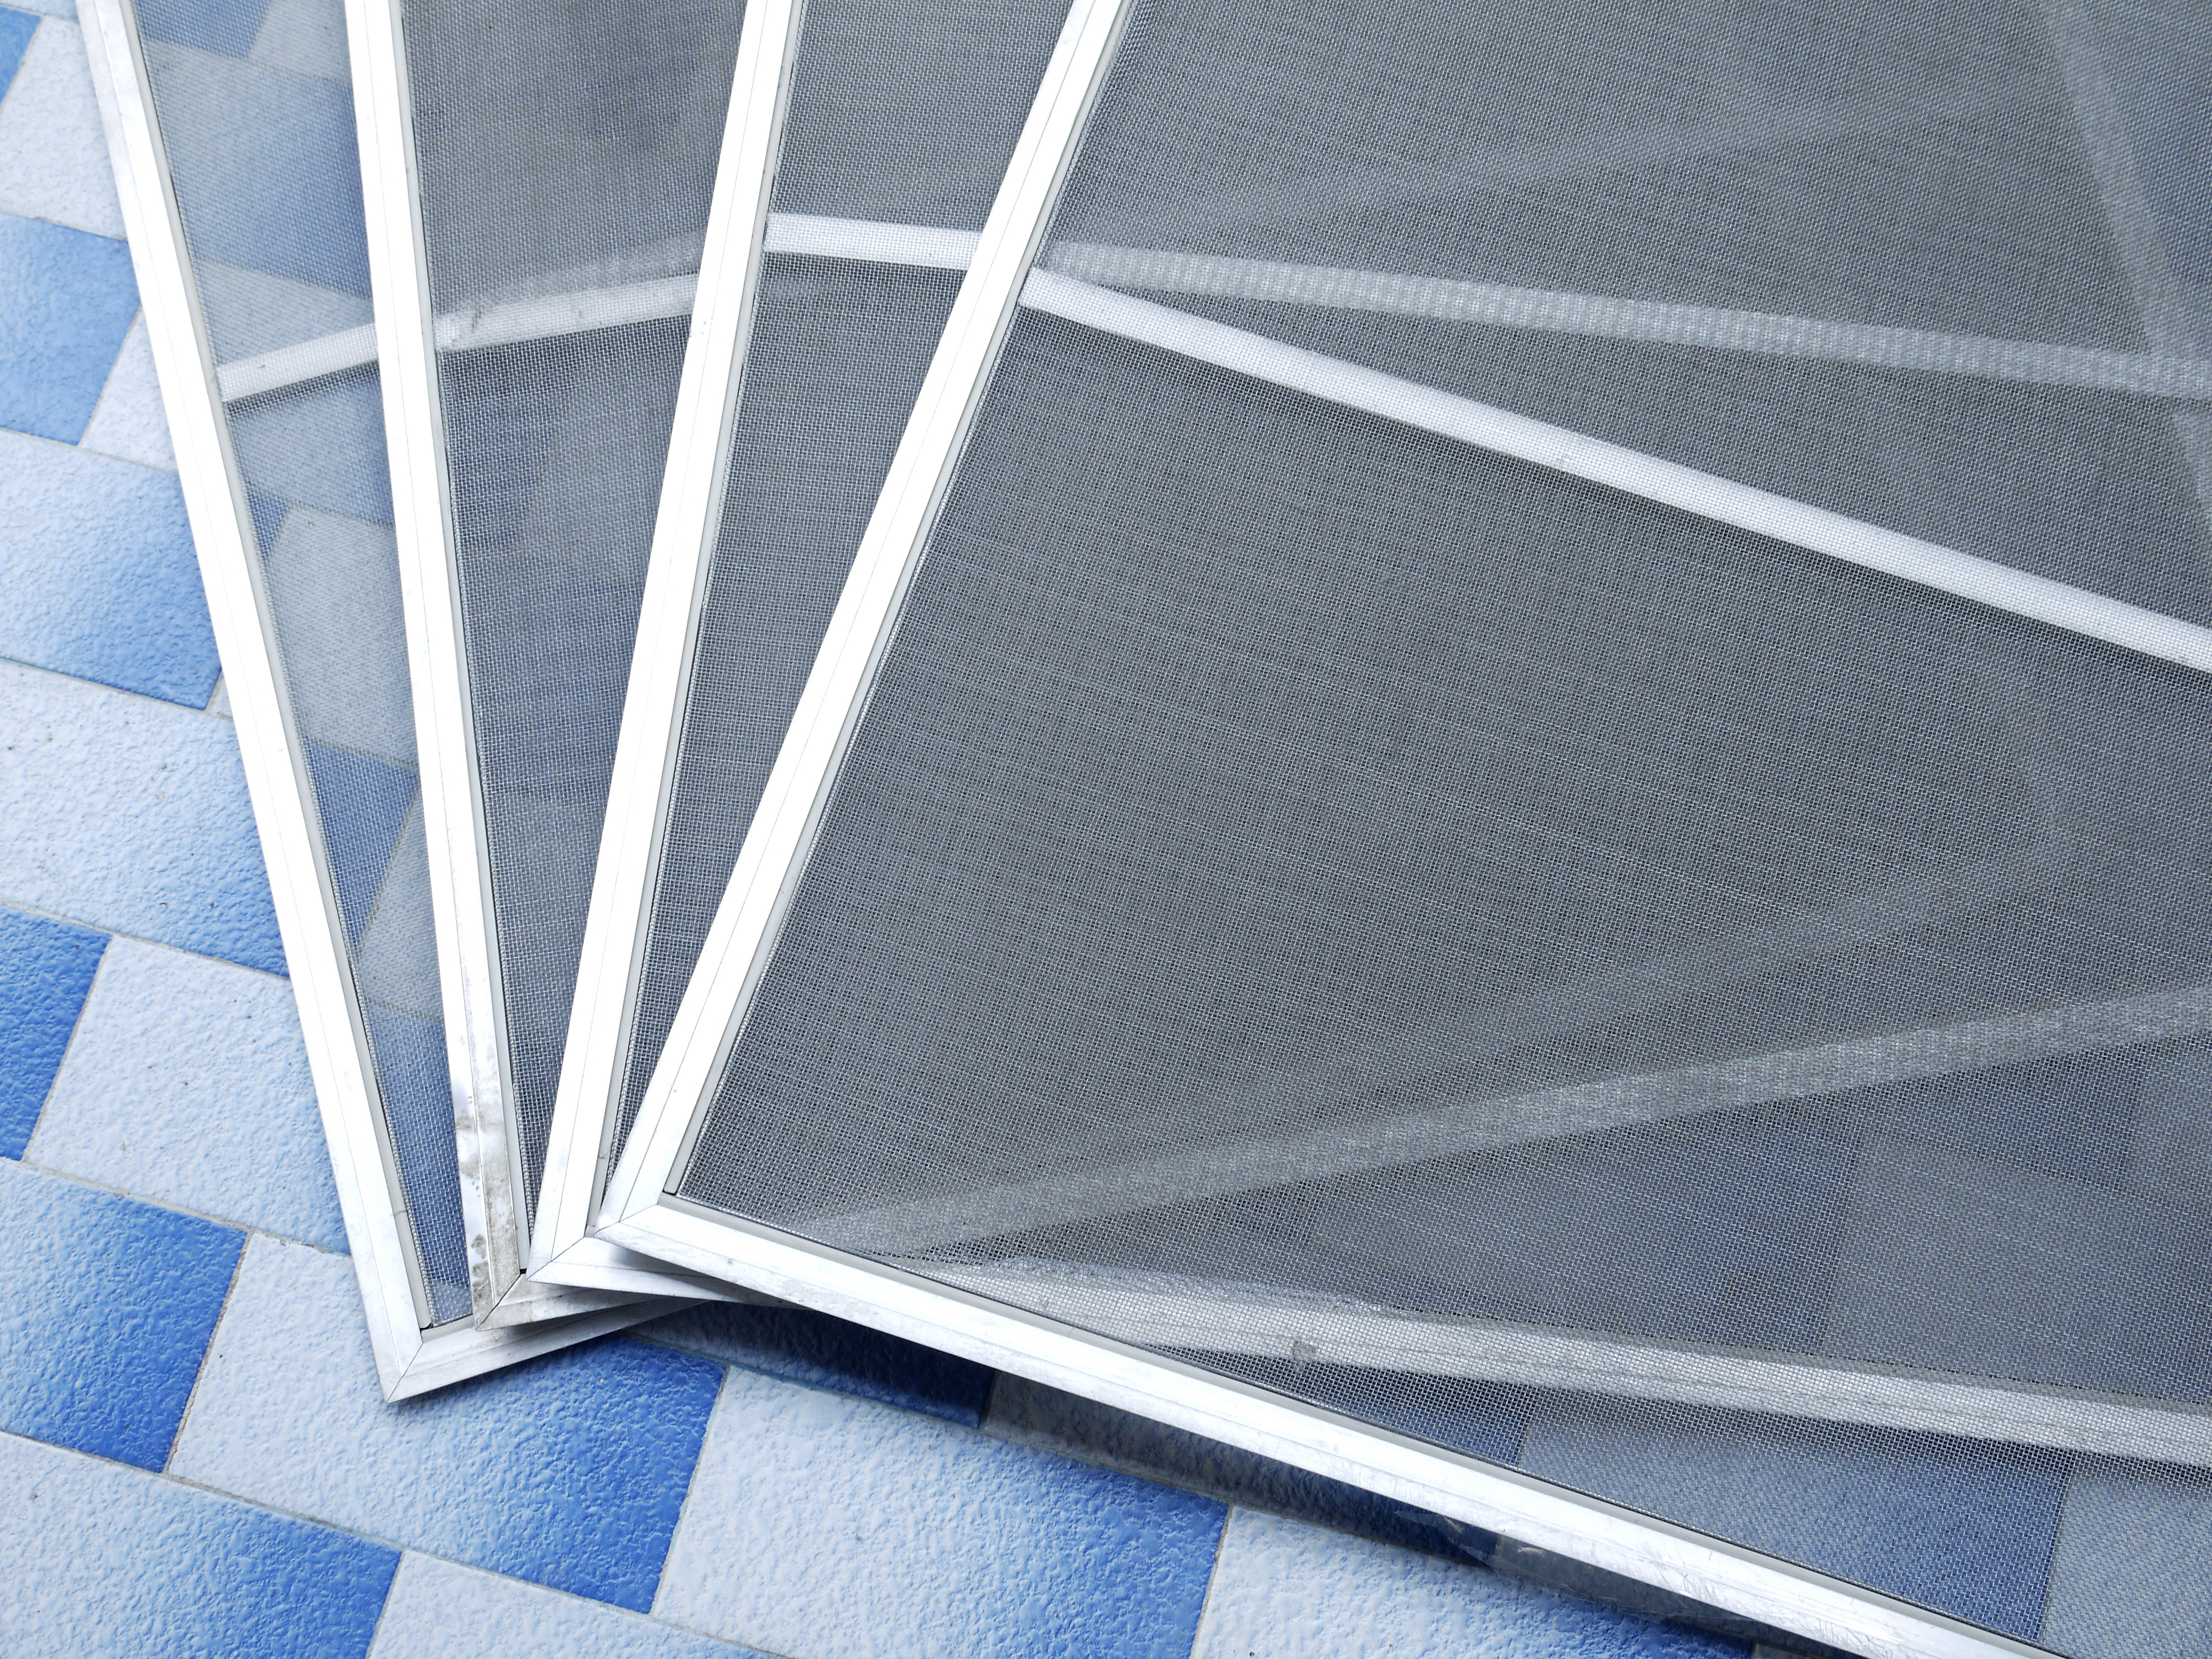 Window Screens: Did you know you have options?